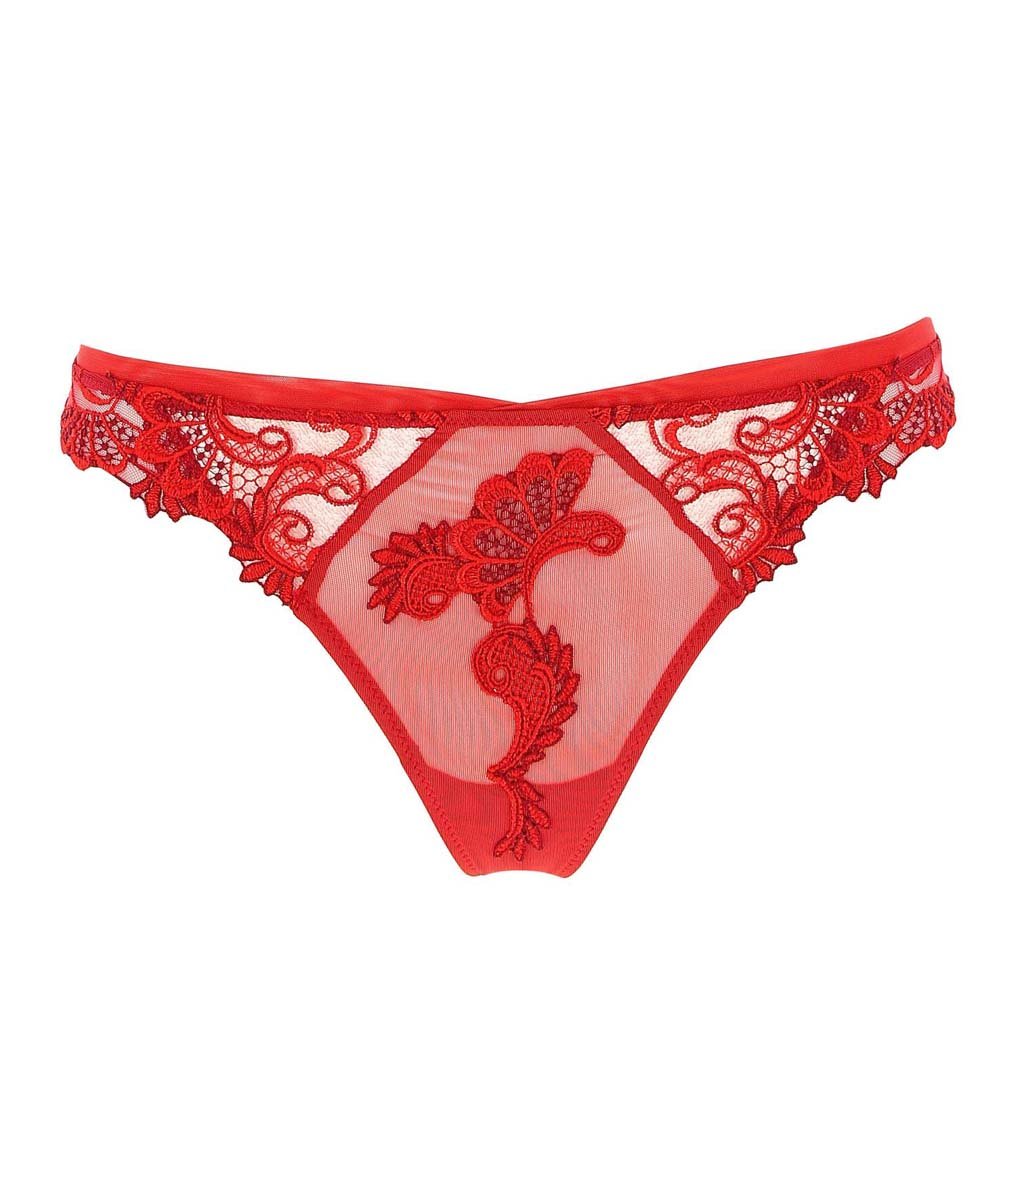 Lise Charmel 'Dressing Floral' (Dressing Solaire) Thong - Sandra Dee - Product Shot - Front